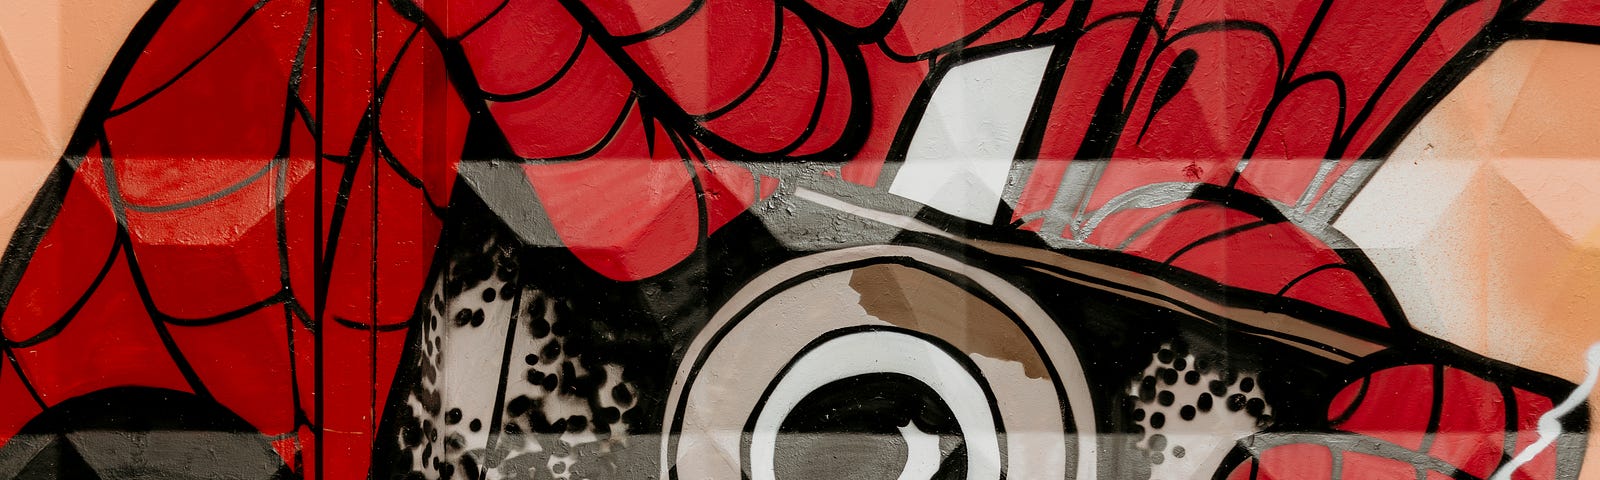 A mural of Spider-Man hanging upside-down and taking a photo with his analog camera.